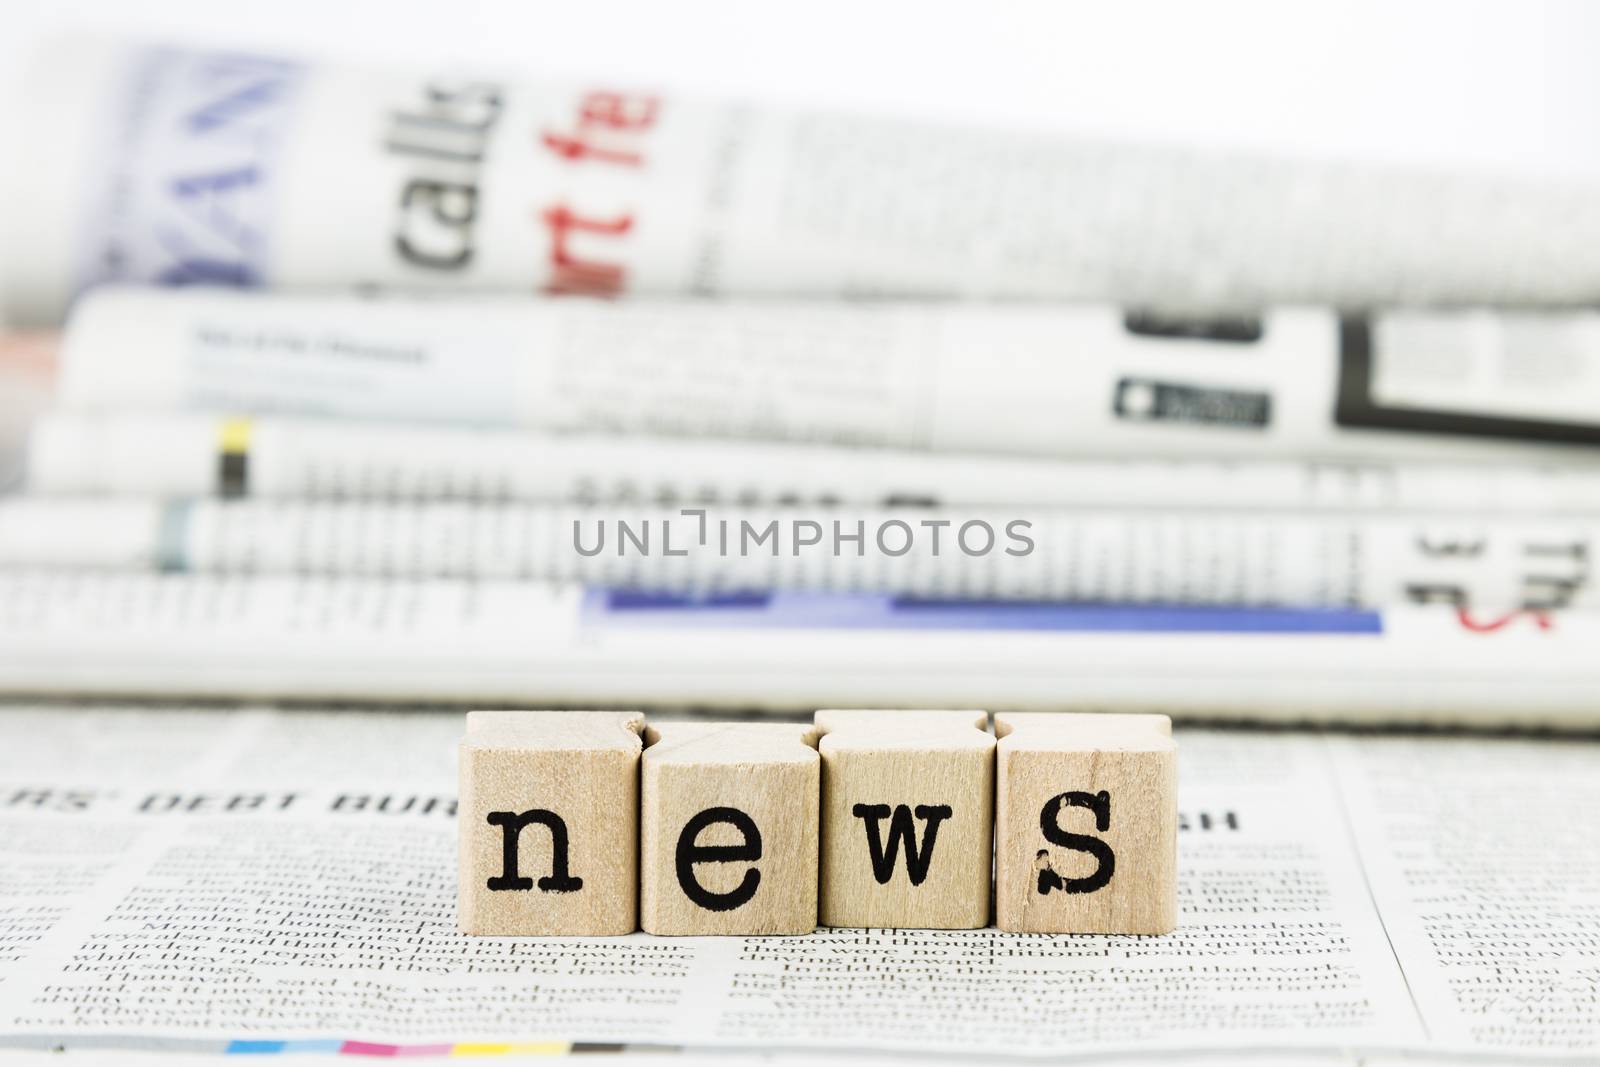 news concept, close-up wooden text wording on newspaper